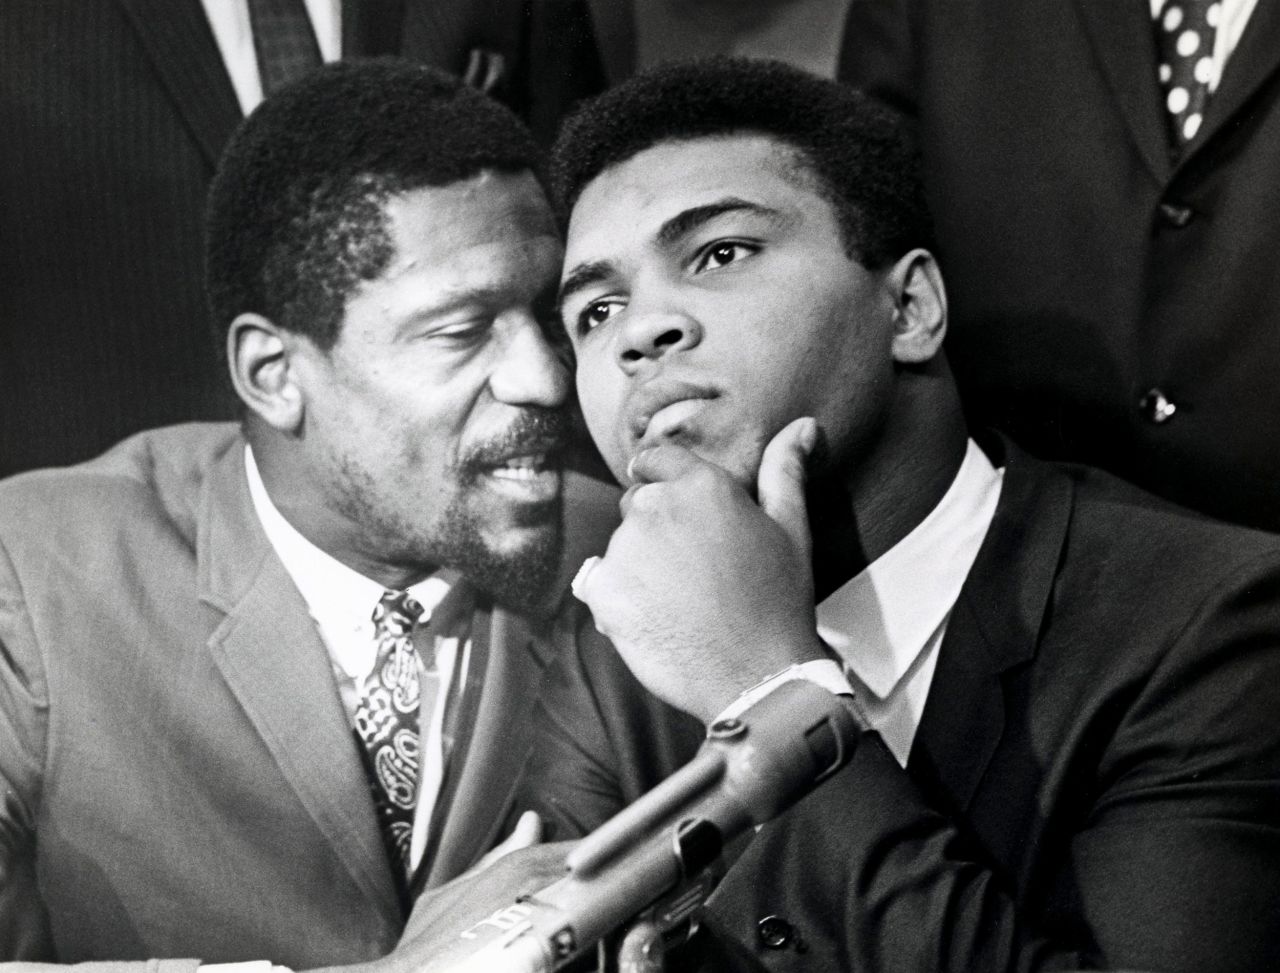 Russell, left, speaks with boxer and fellow civil rights trailblazer Muhammad Ali, in Cleveland, Ohio, in 1967. The two were joined by other Black athletes at a news conference in support of Ali's refusal to fight in the Vietnam War.